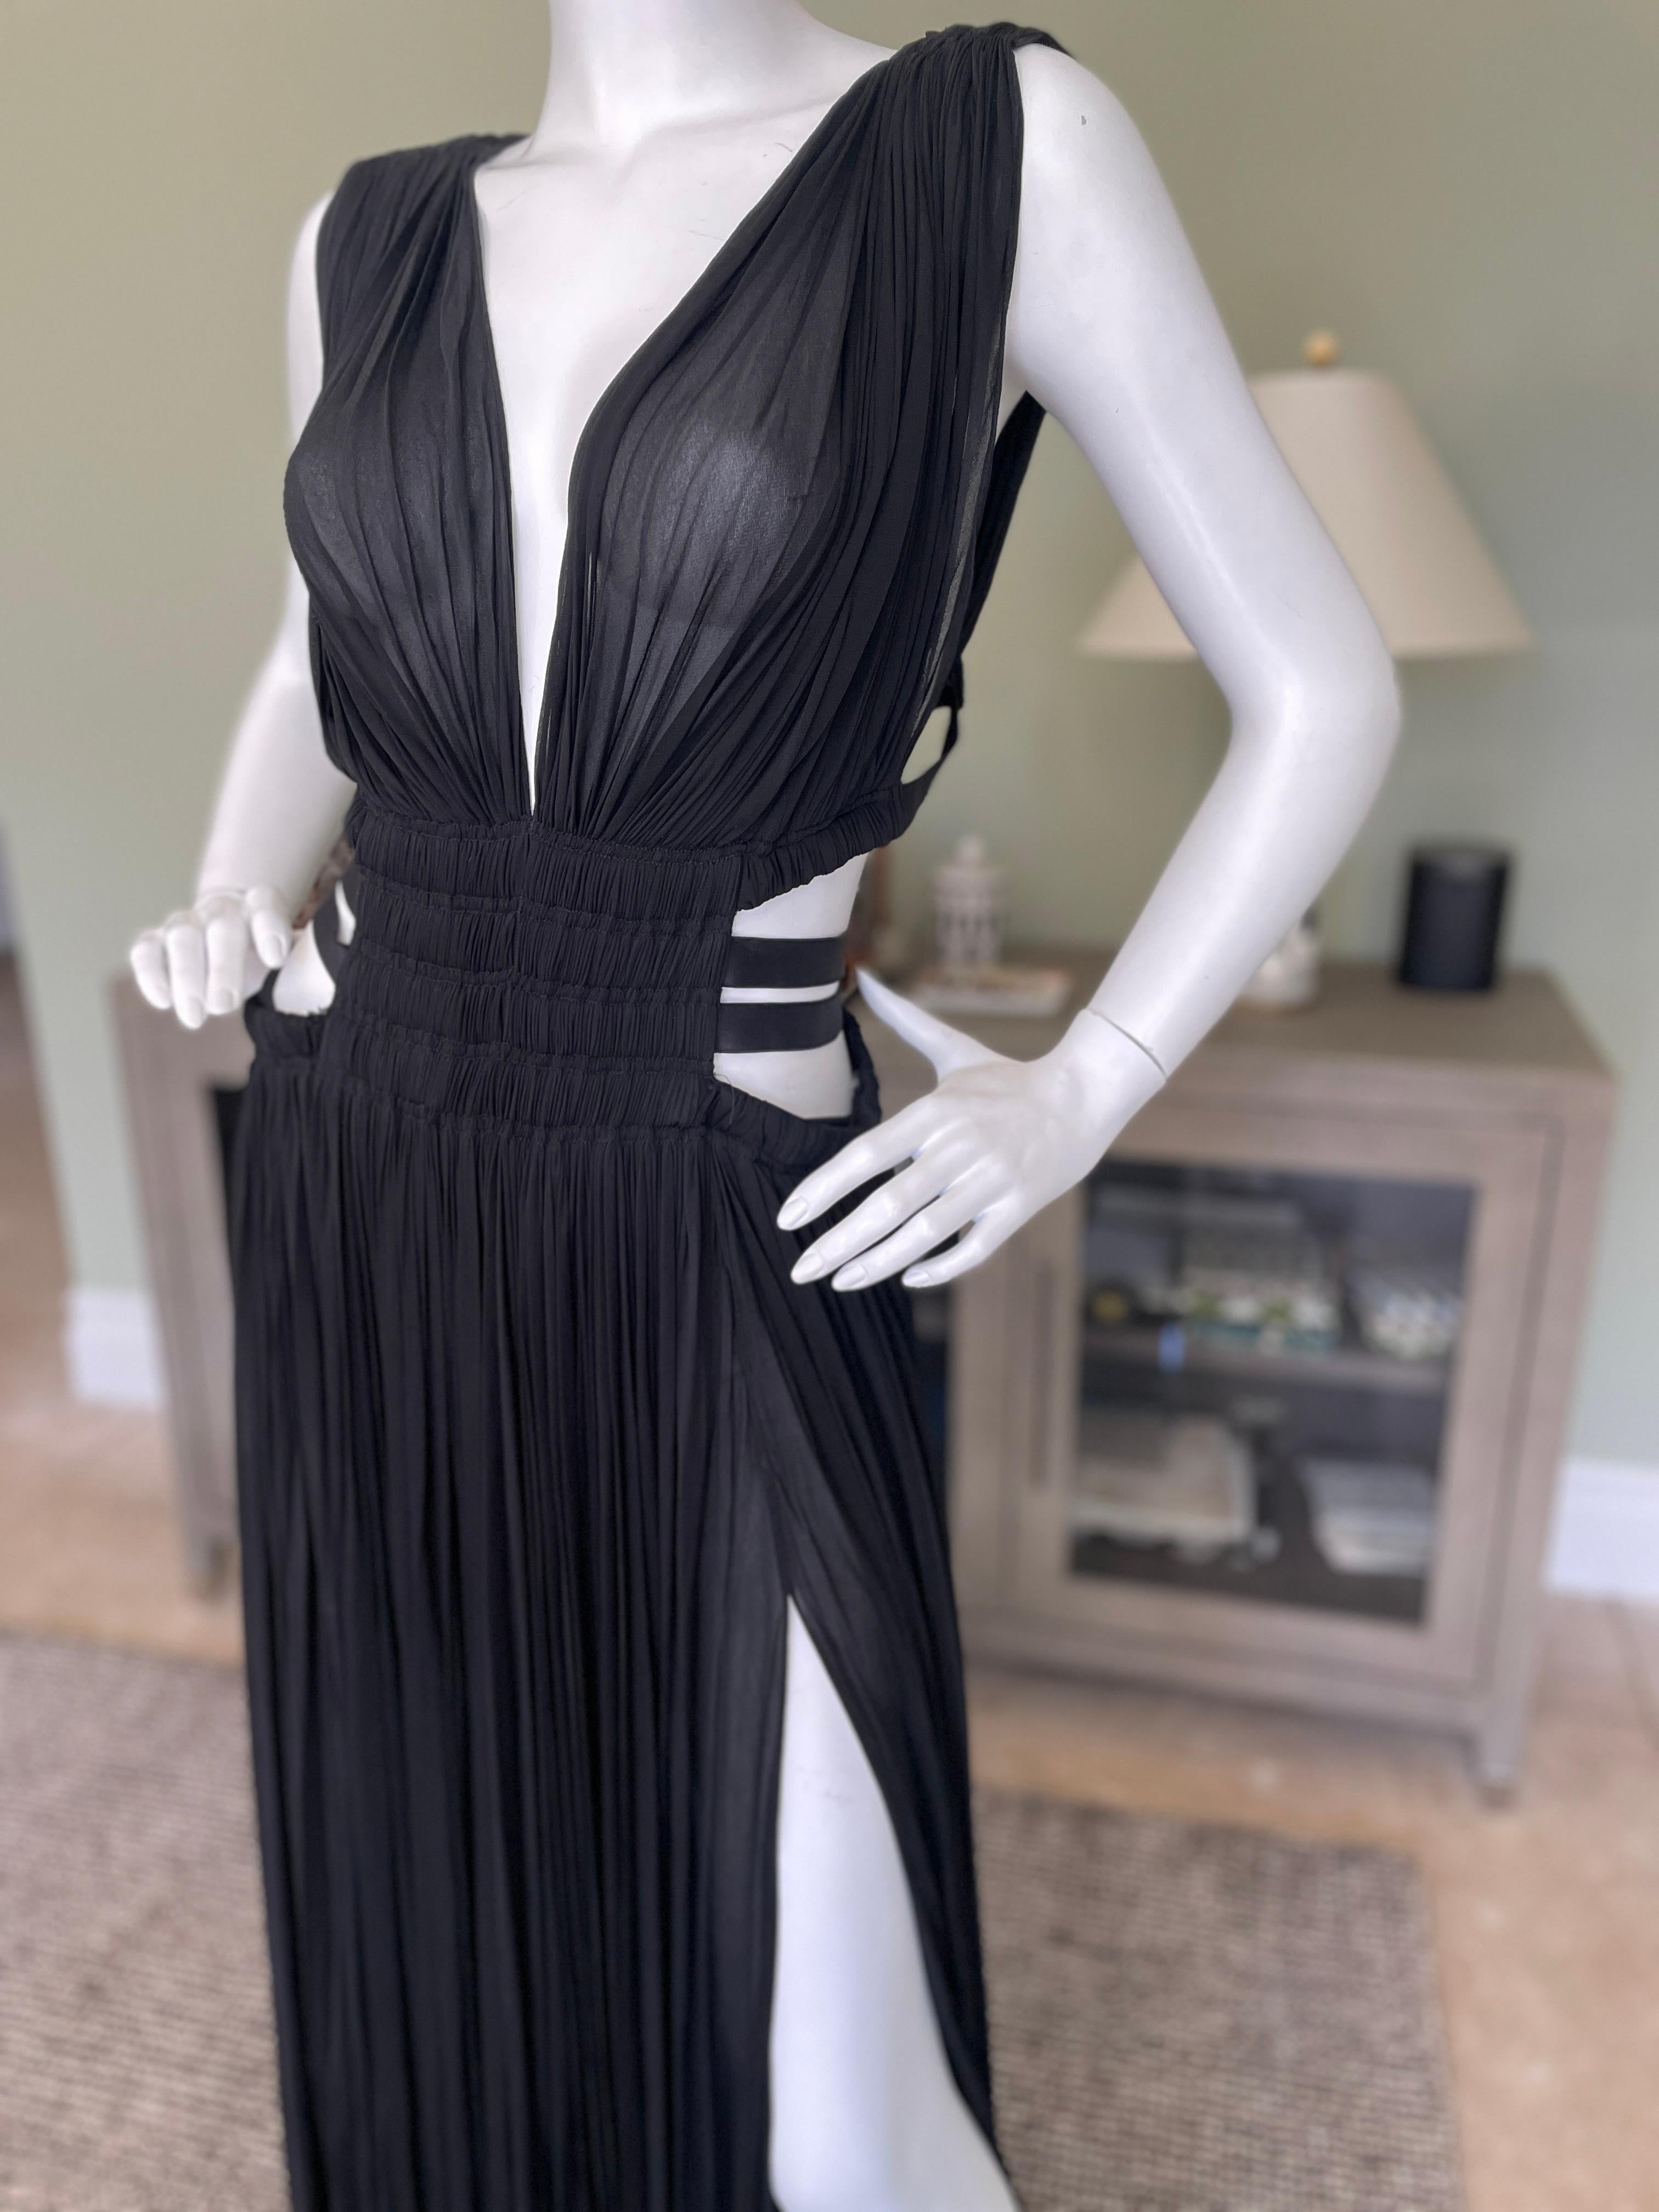 Women's Azzedine Alaia 2004 Semi Sheer Black Pleated Goddess Gown with Side Straps For Sale